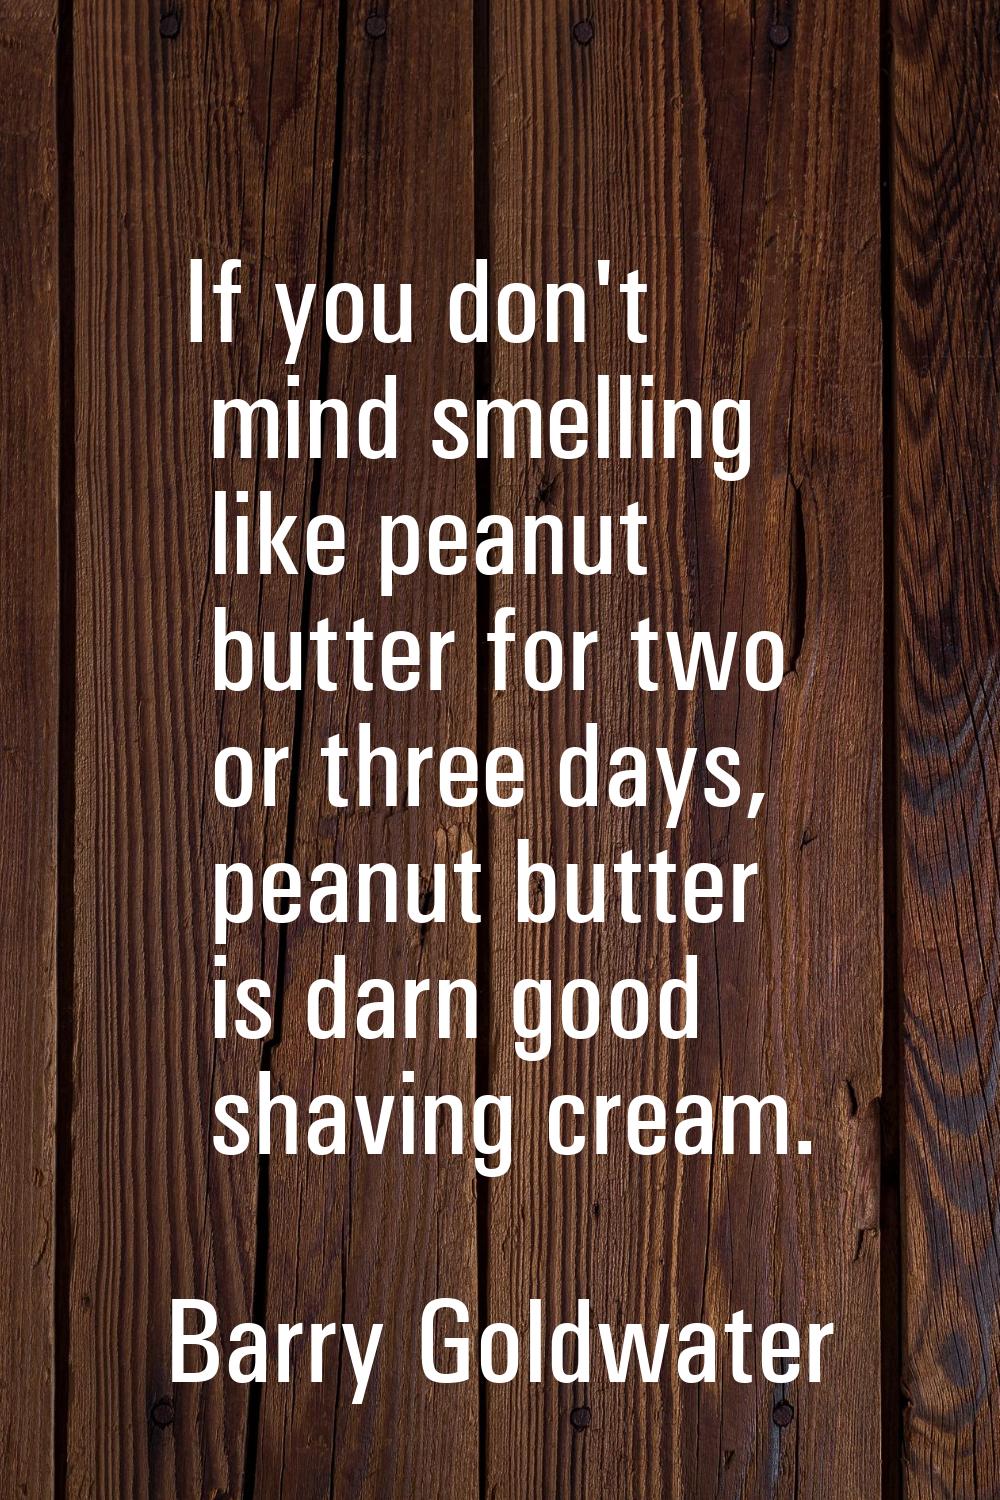 If you don't mind smelling like peanut butter for two or three days, peanut butter is darn good sha